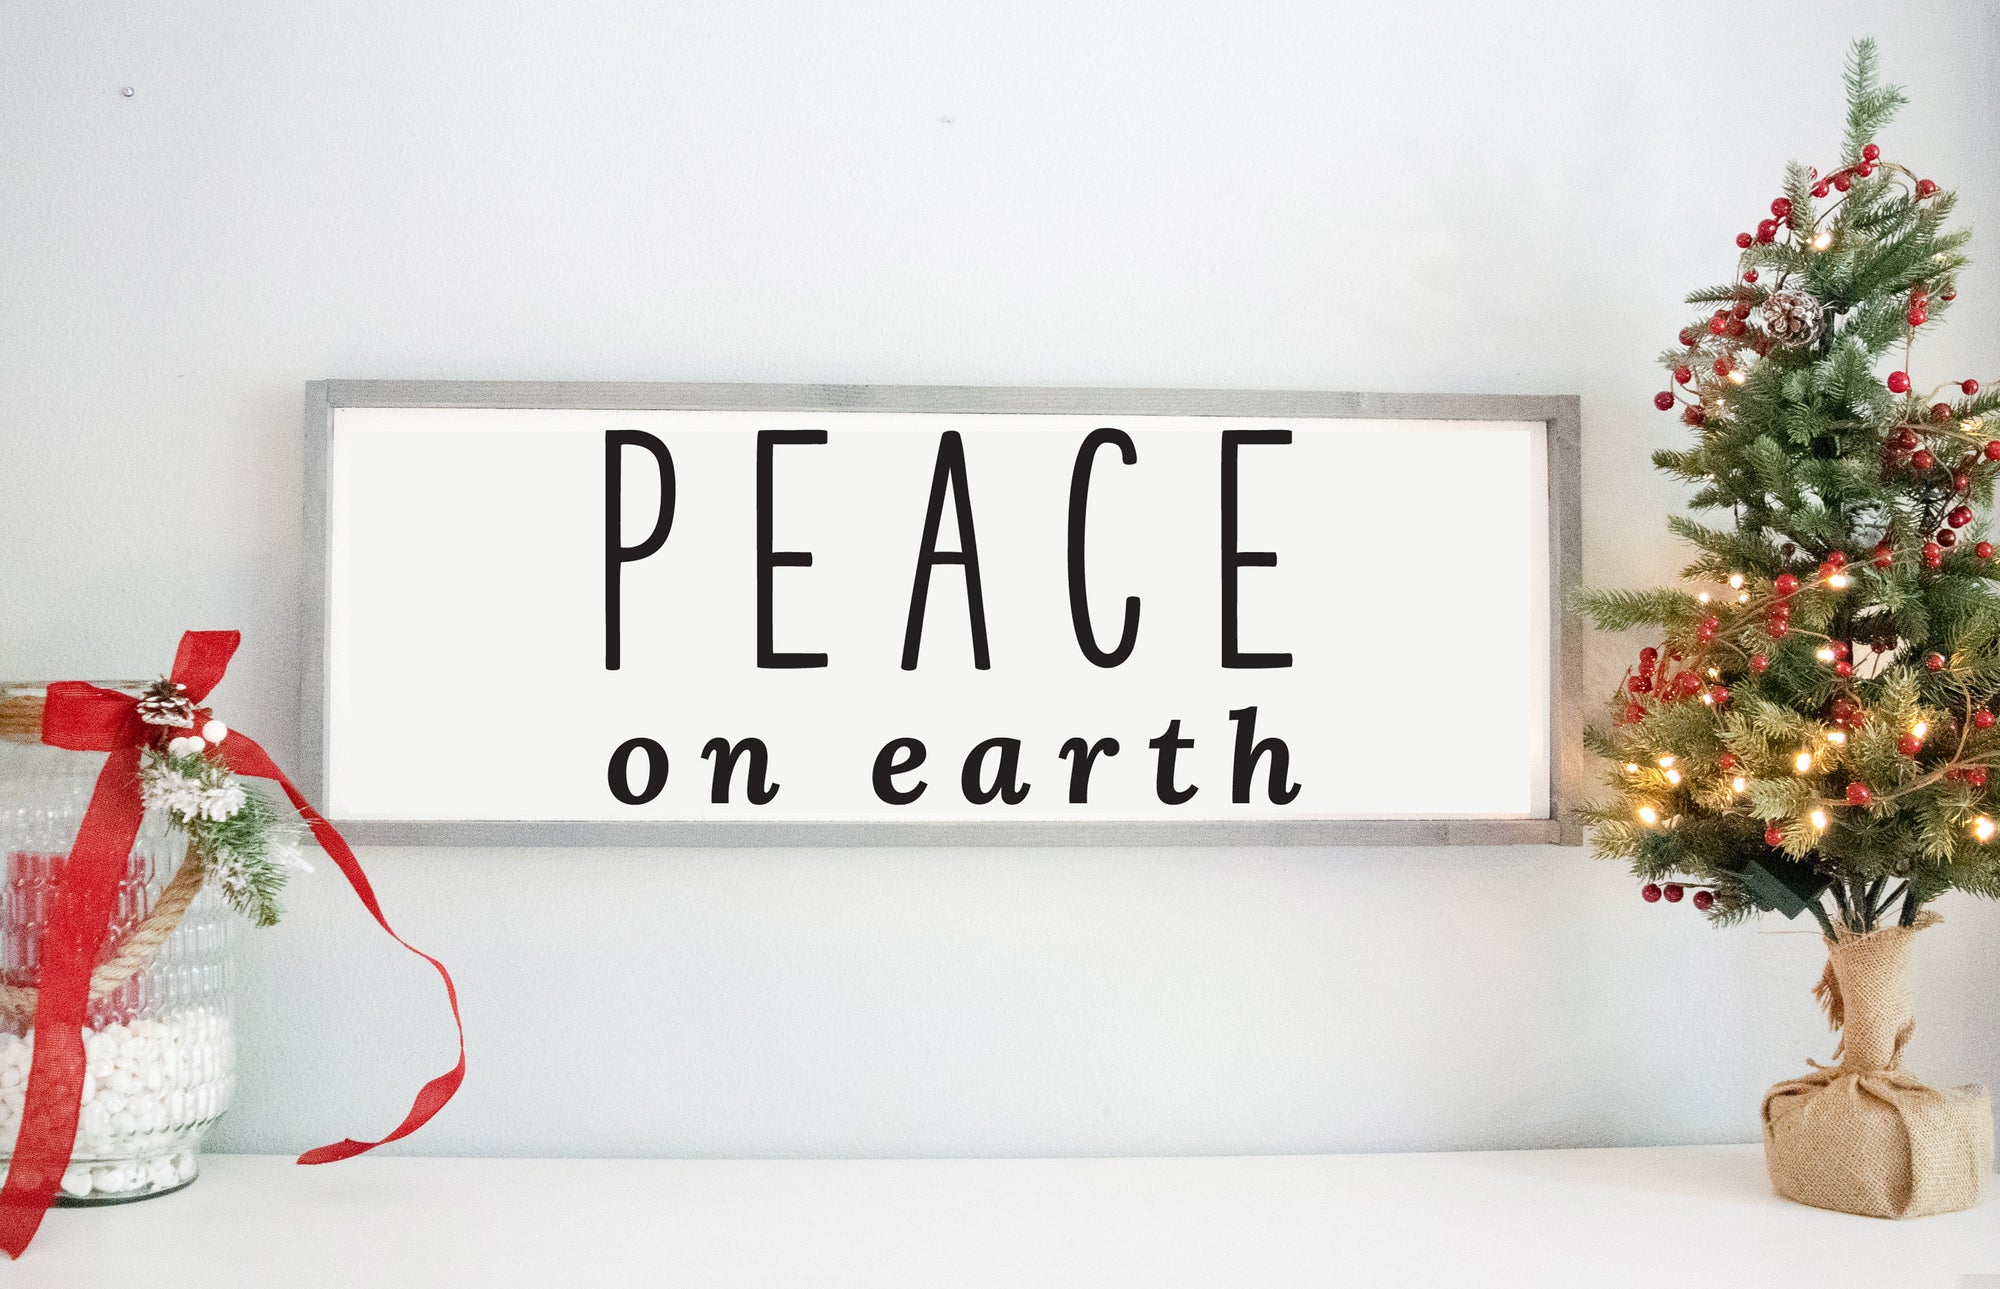 Peace on Earth wooden sign - Rustic Farmhouse Wood Wall Signs - Personalized Signs for Home - Holiday Sign - Christmas Wall Decor - Cursive